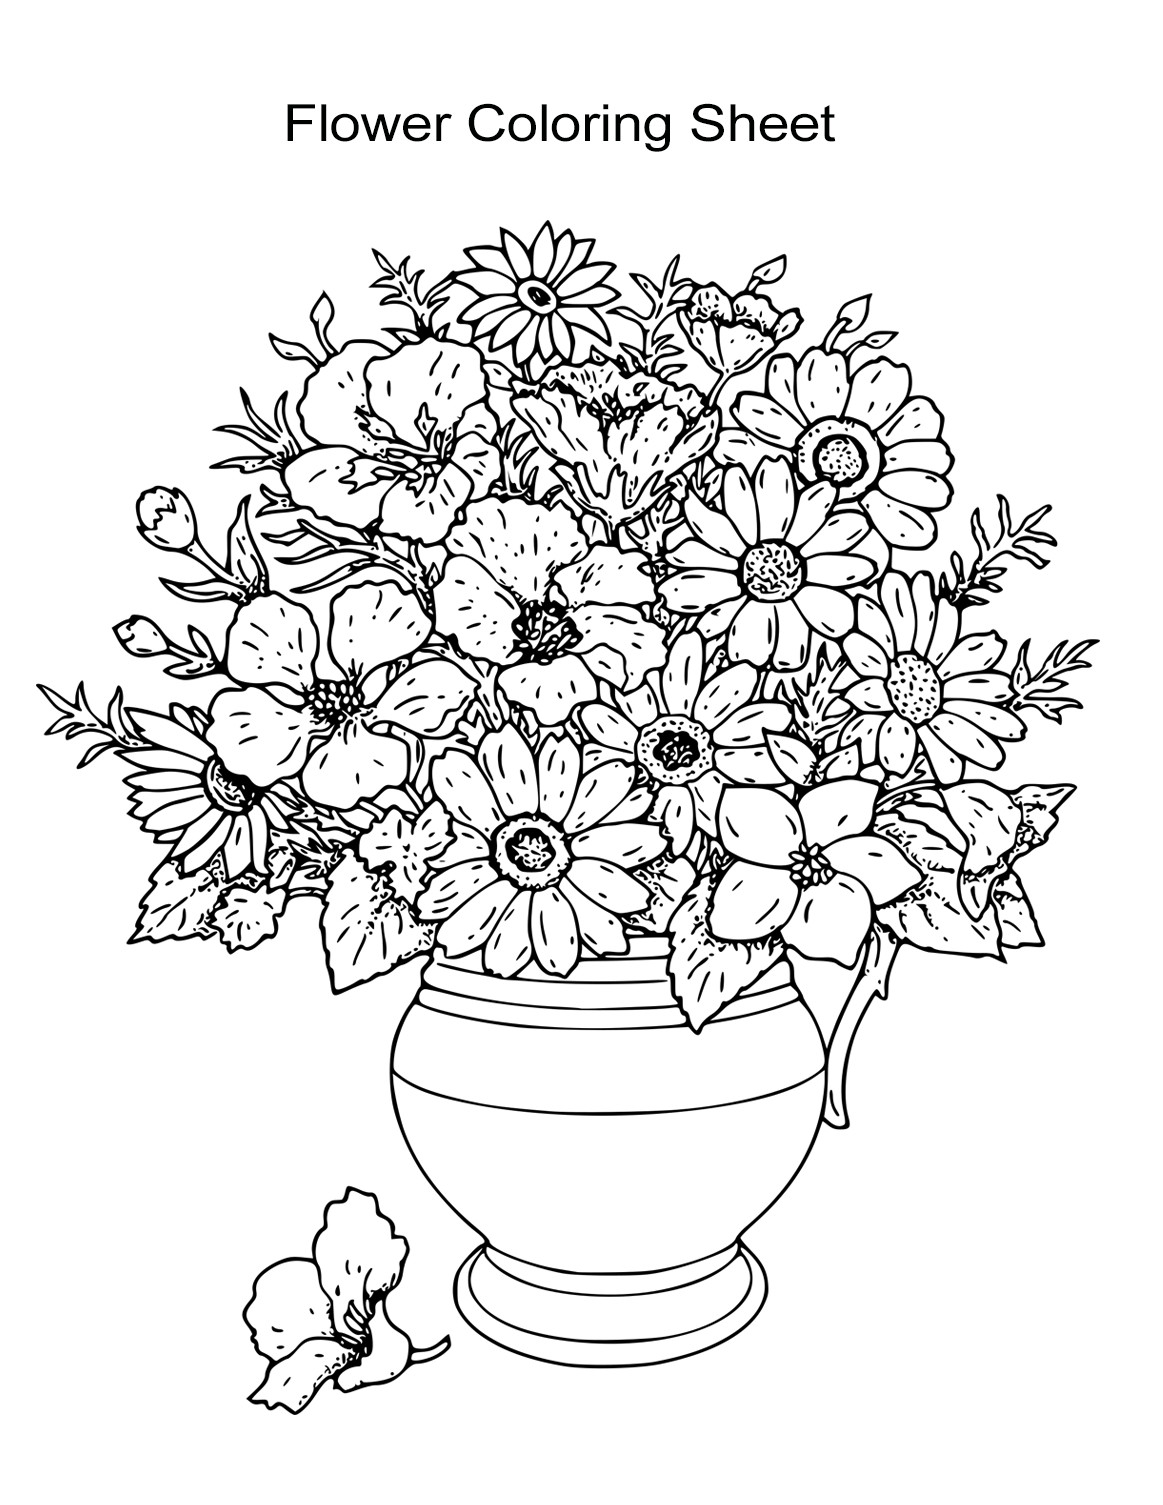 Flower Coloring Pages For Girls
 10 Flower Coloring Sheets for Girls and Boys ALL ESL